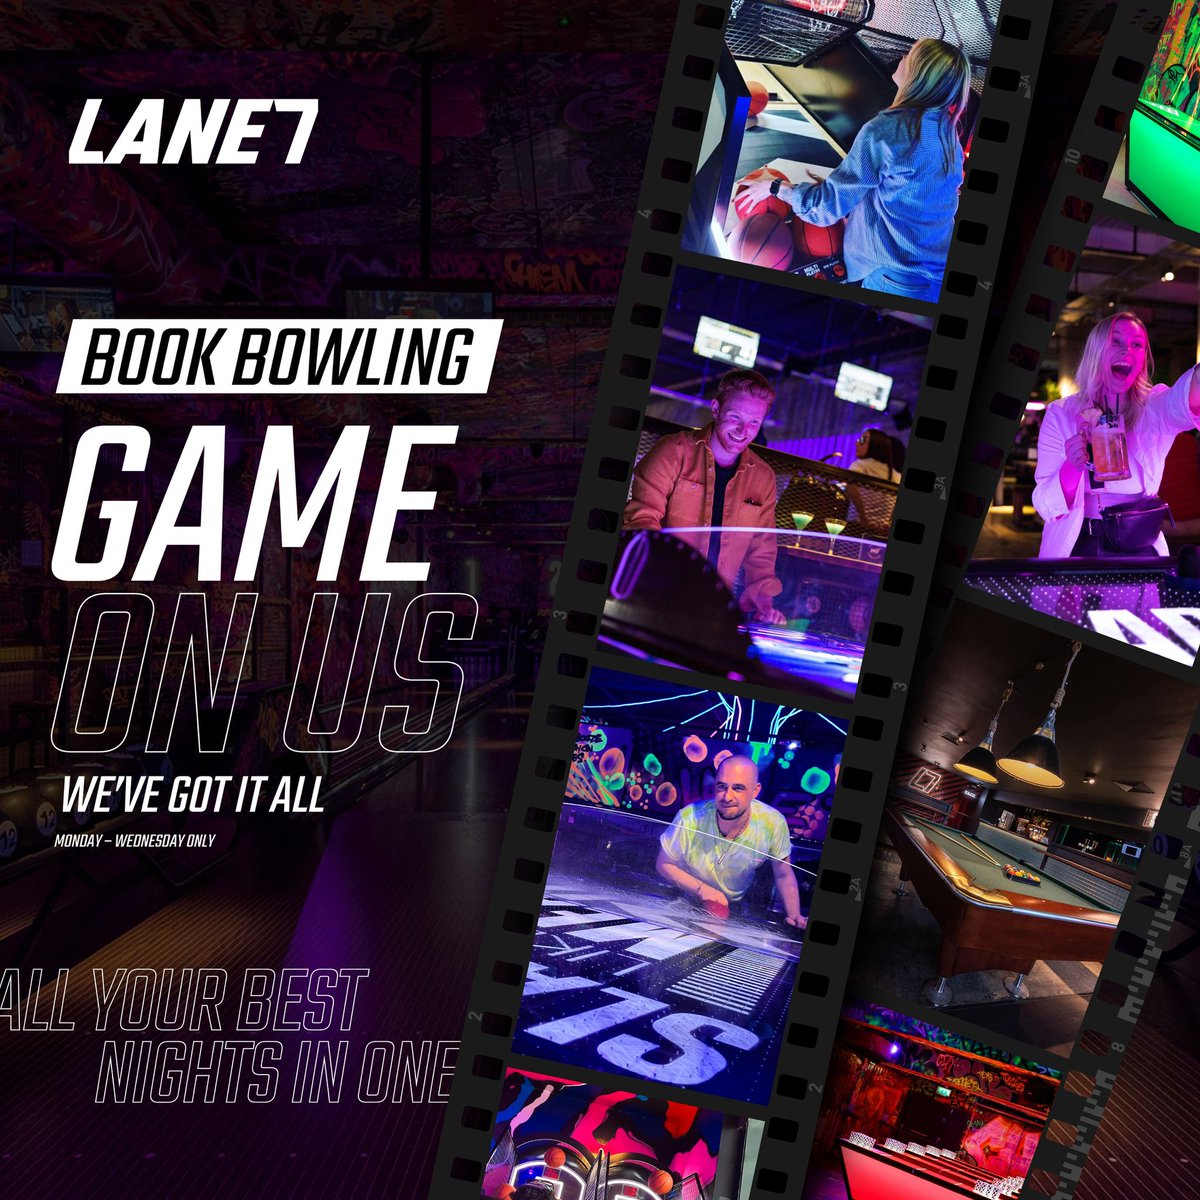 @lane7_ truly have it all! 🎳 And now, when you book bowling, they will give you one hour of FREE gaming! This could be pool, darts, shuffleboard or ping pong - get booking and gaming today! 🙌 *T&Cs on the Lane 7 website. #Lane7 #GameOnUs #ThingsToDoInSheff